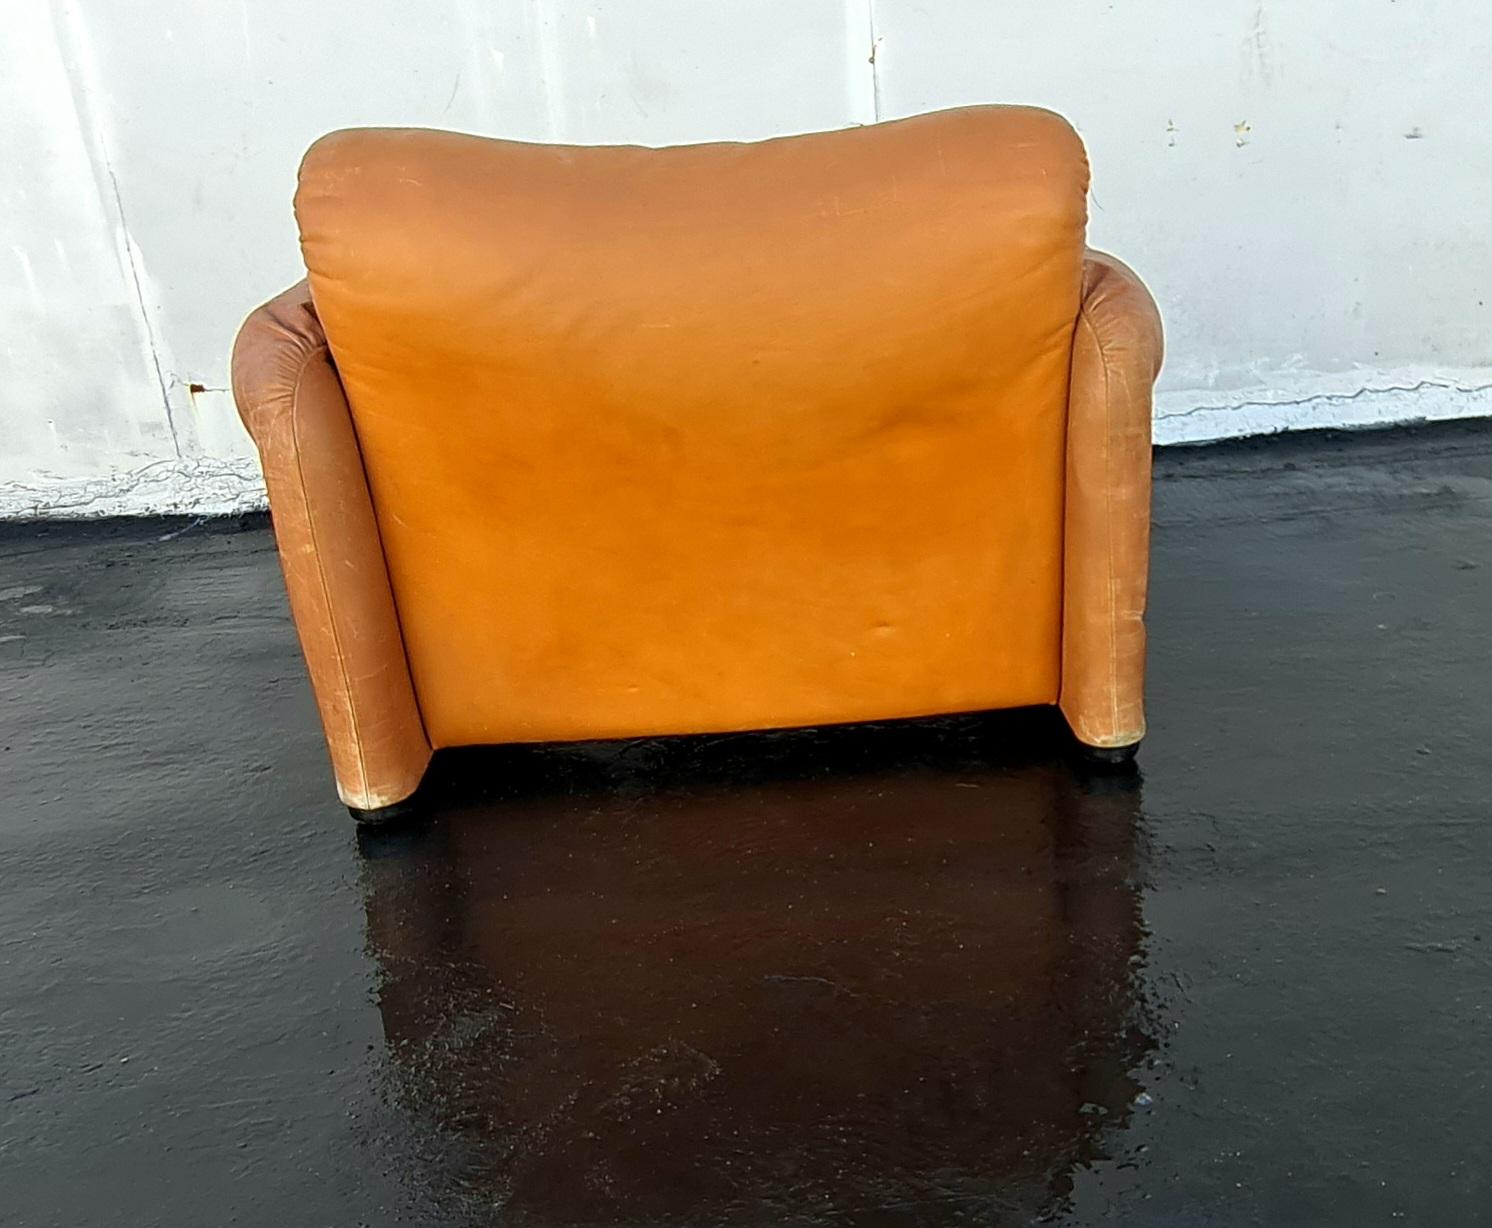 Leather Maralunga Chair 675 by Vico Magistretti for Cassina.